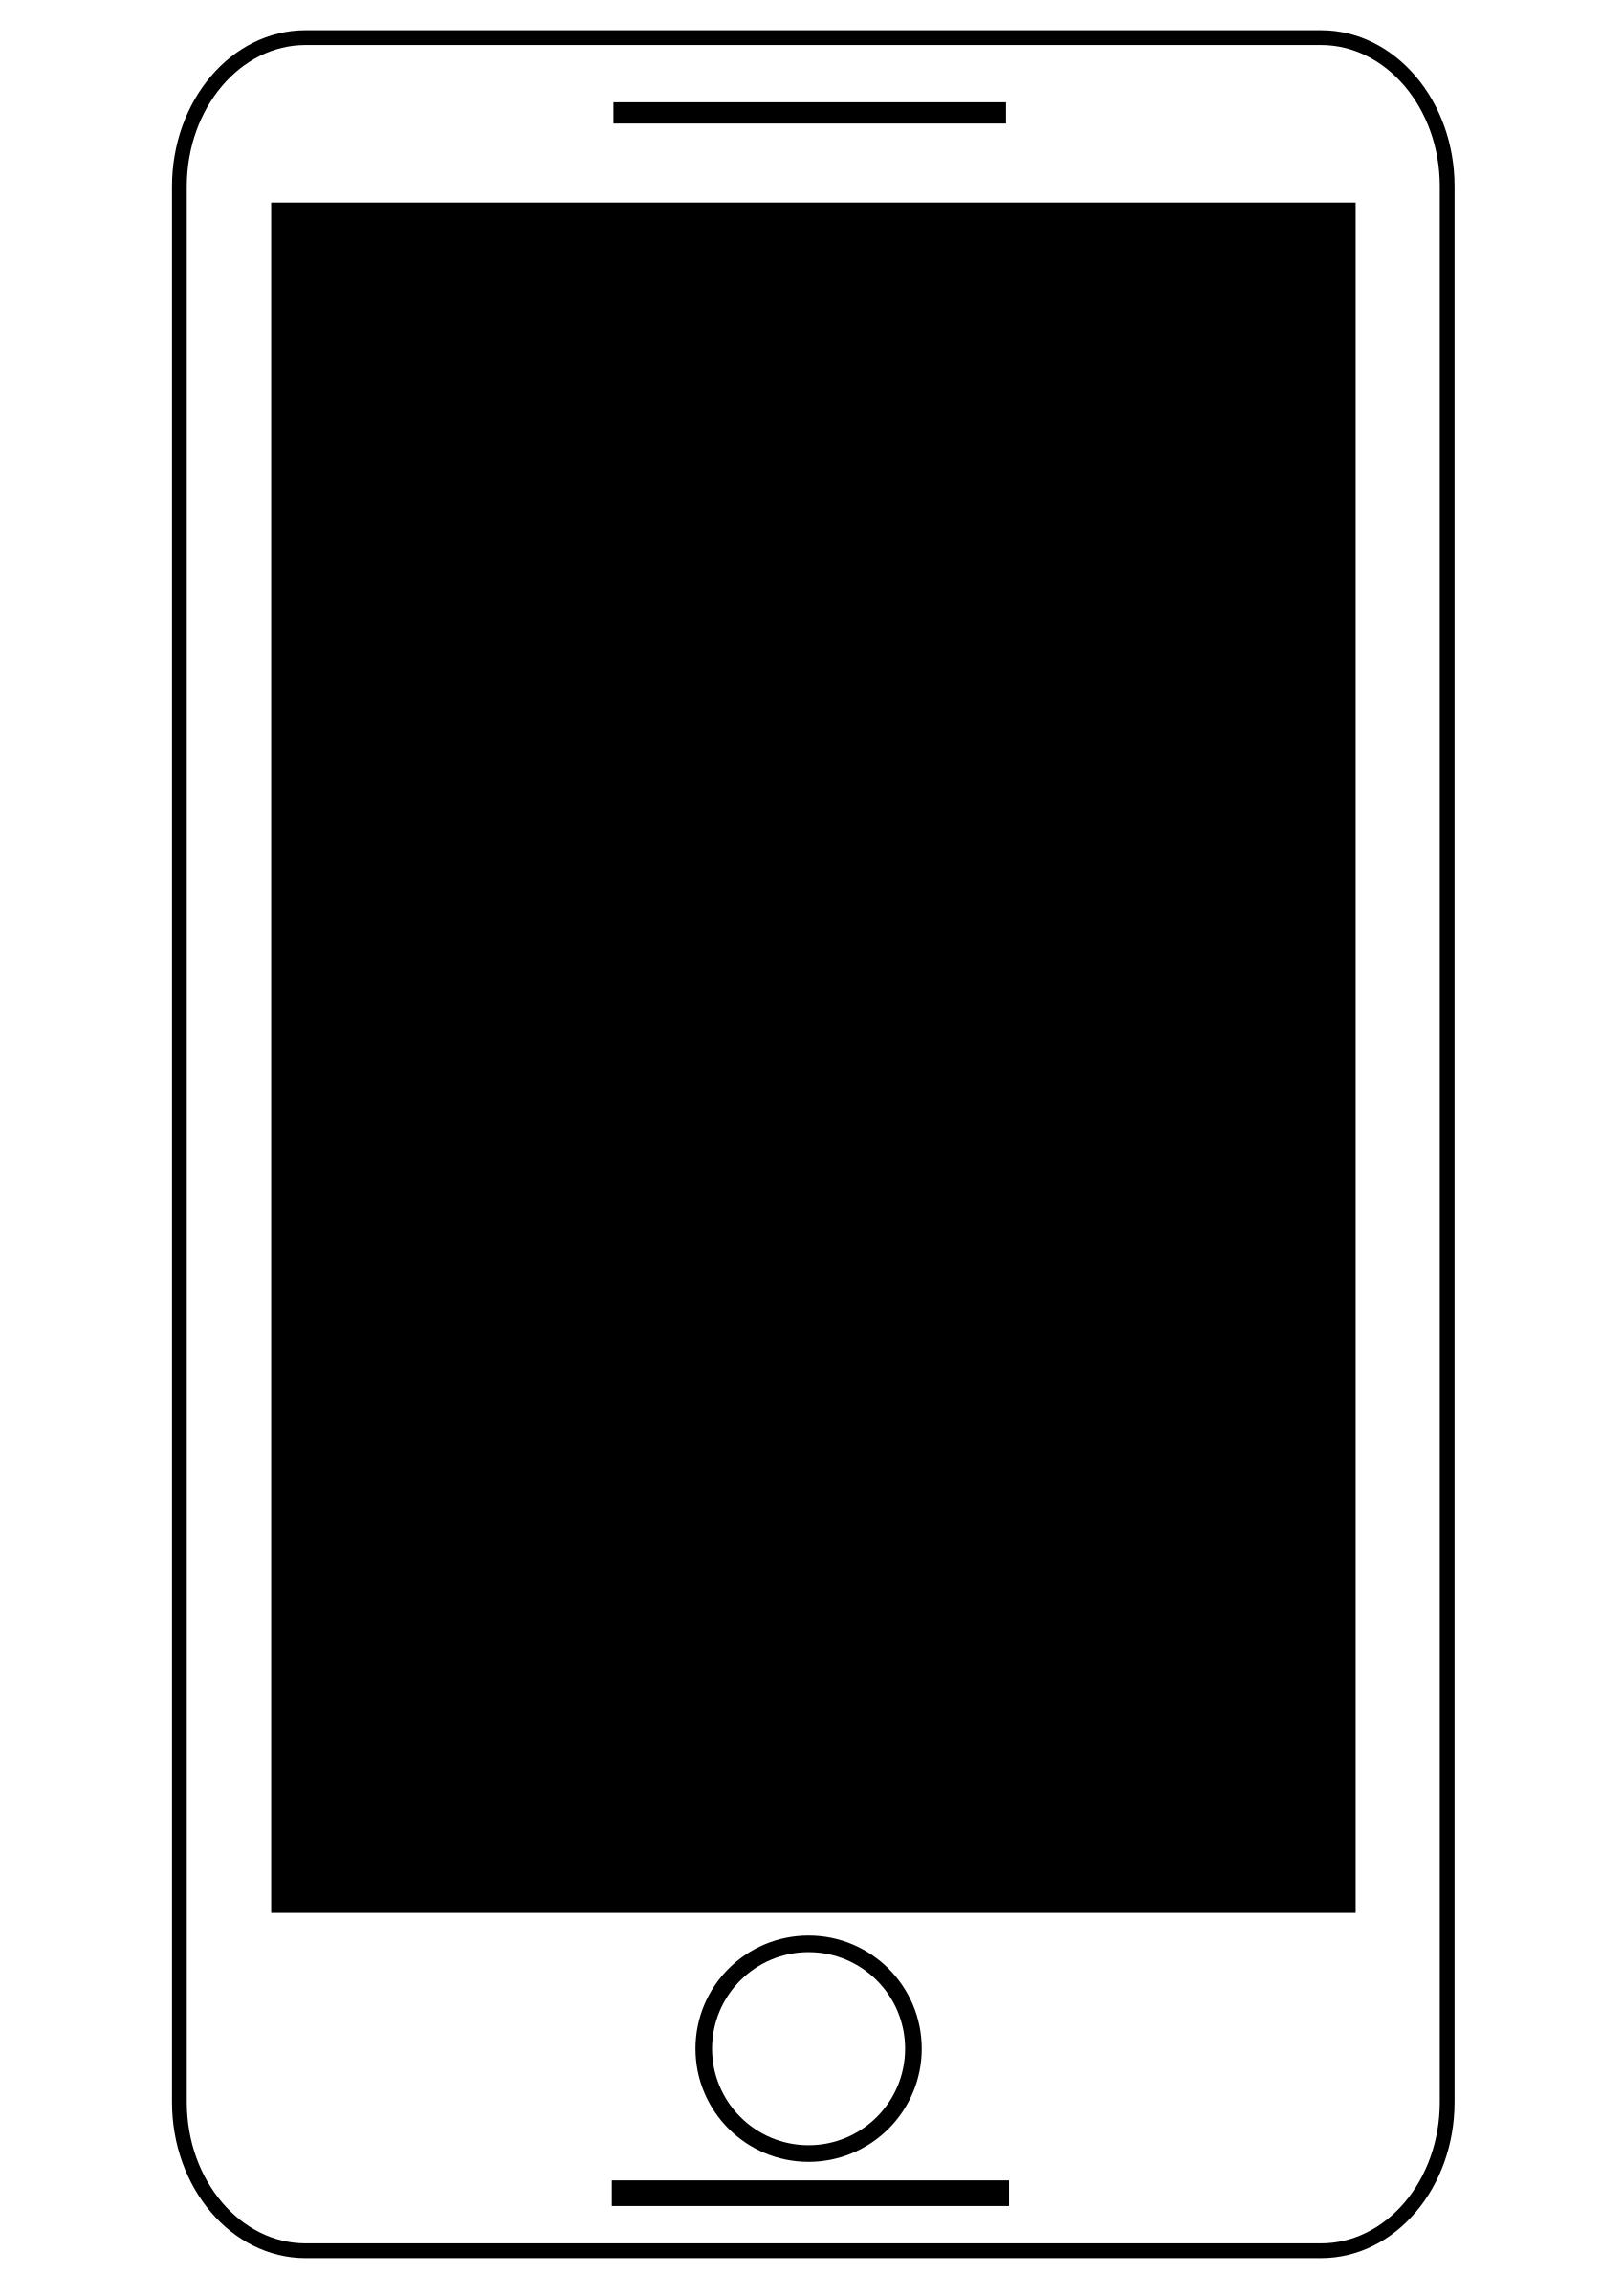 Smartphone - Tablet Black And White Free Clipart Icon png